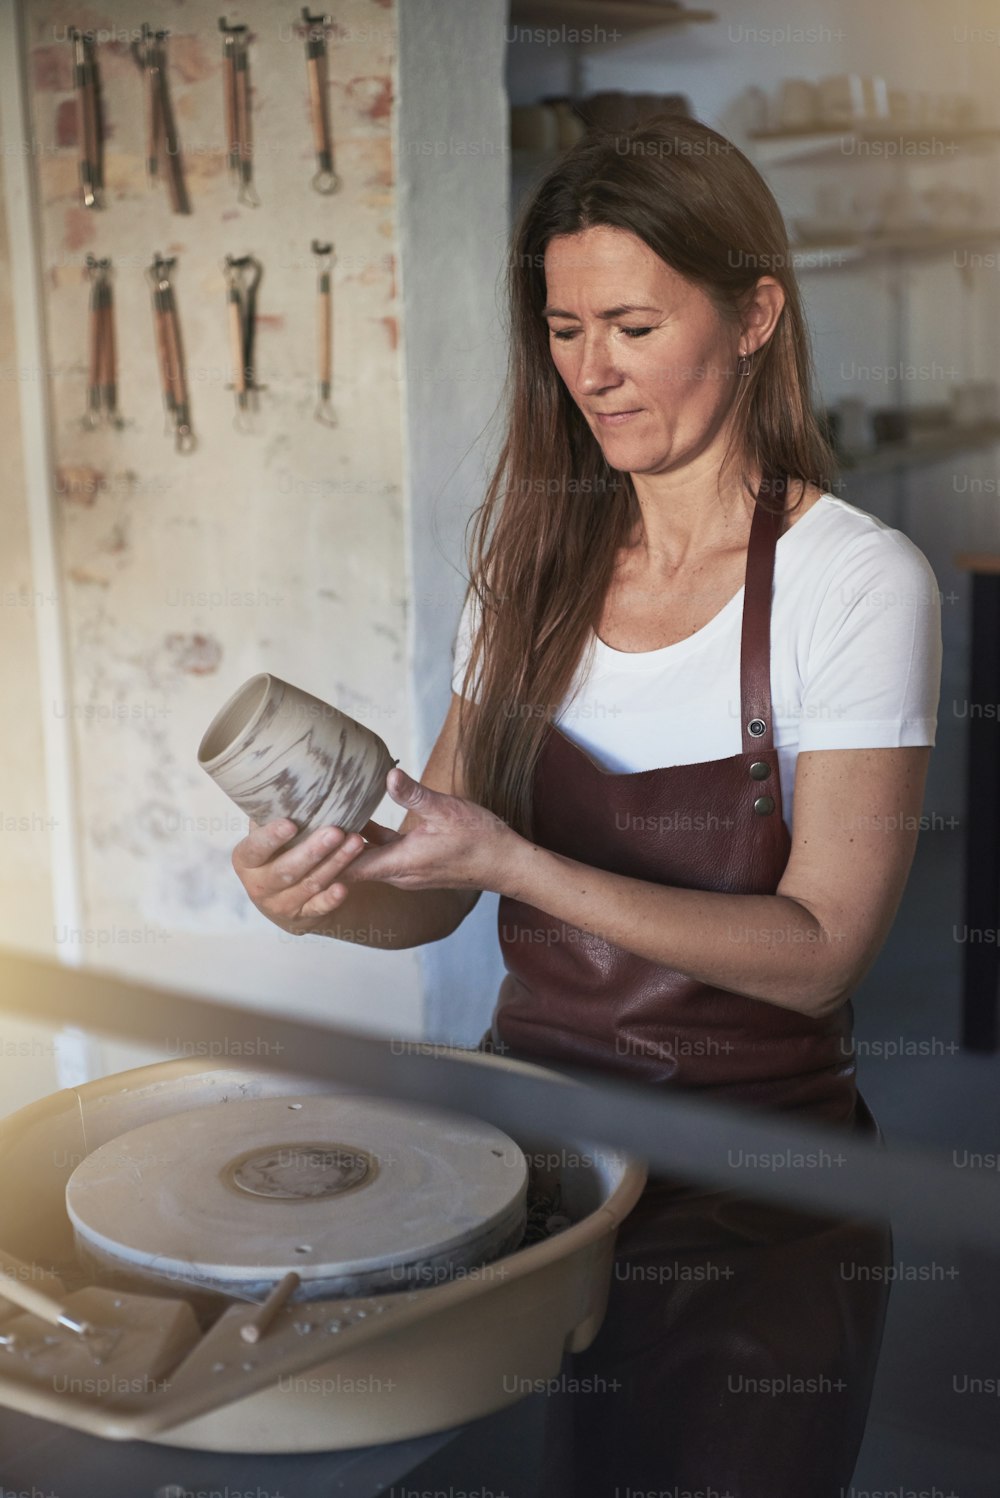 Female artisan standing alone in her creative ceramic studio inspecting a creatively crafted piece of pottery